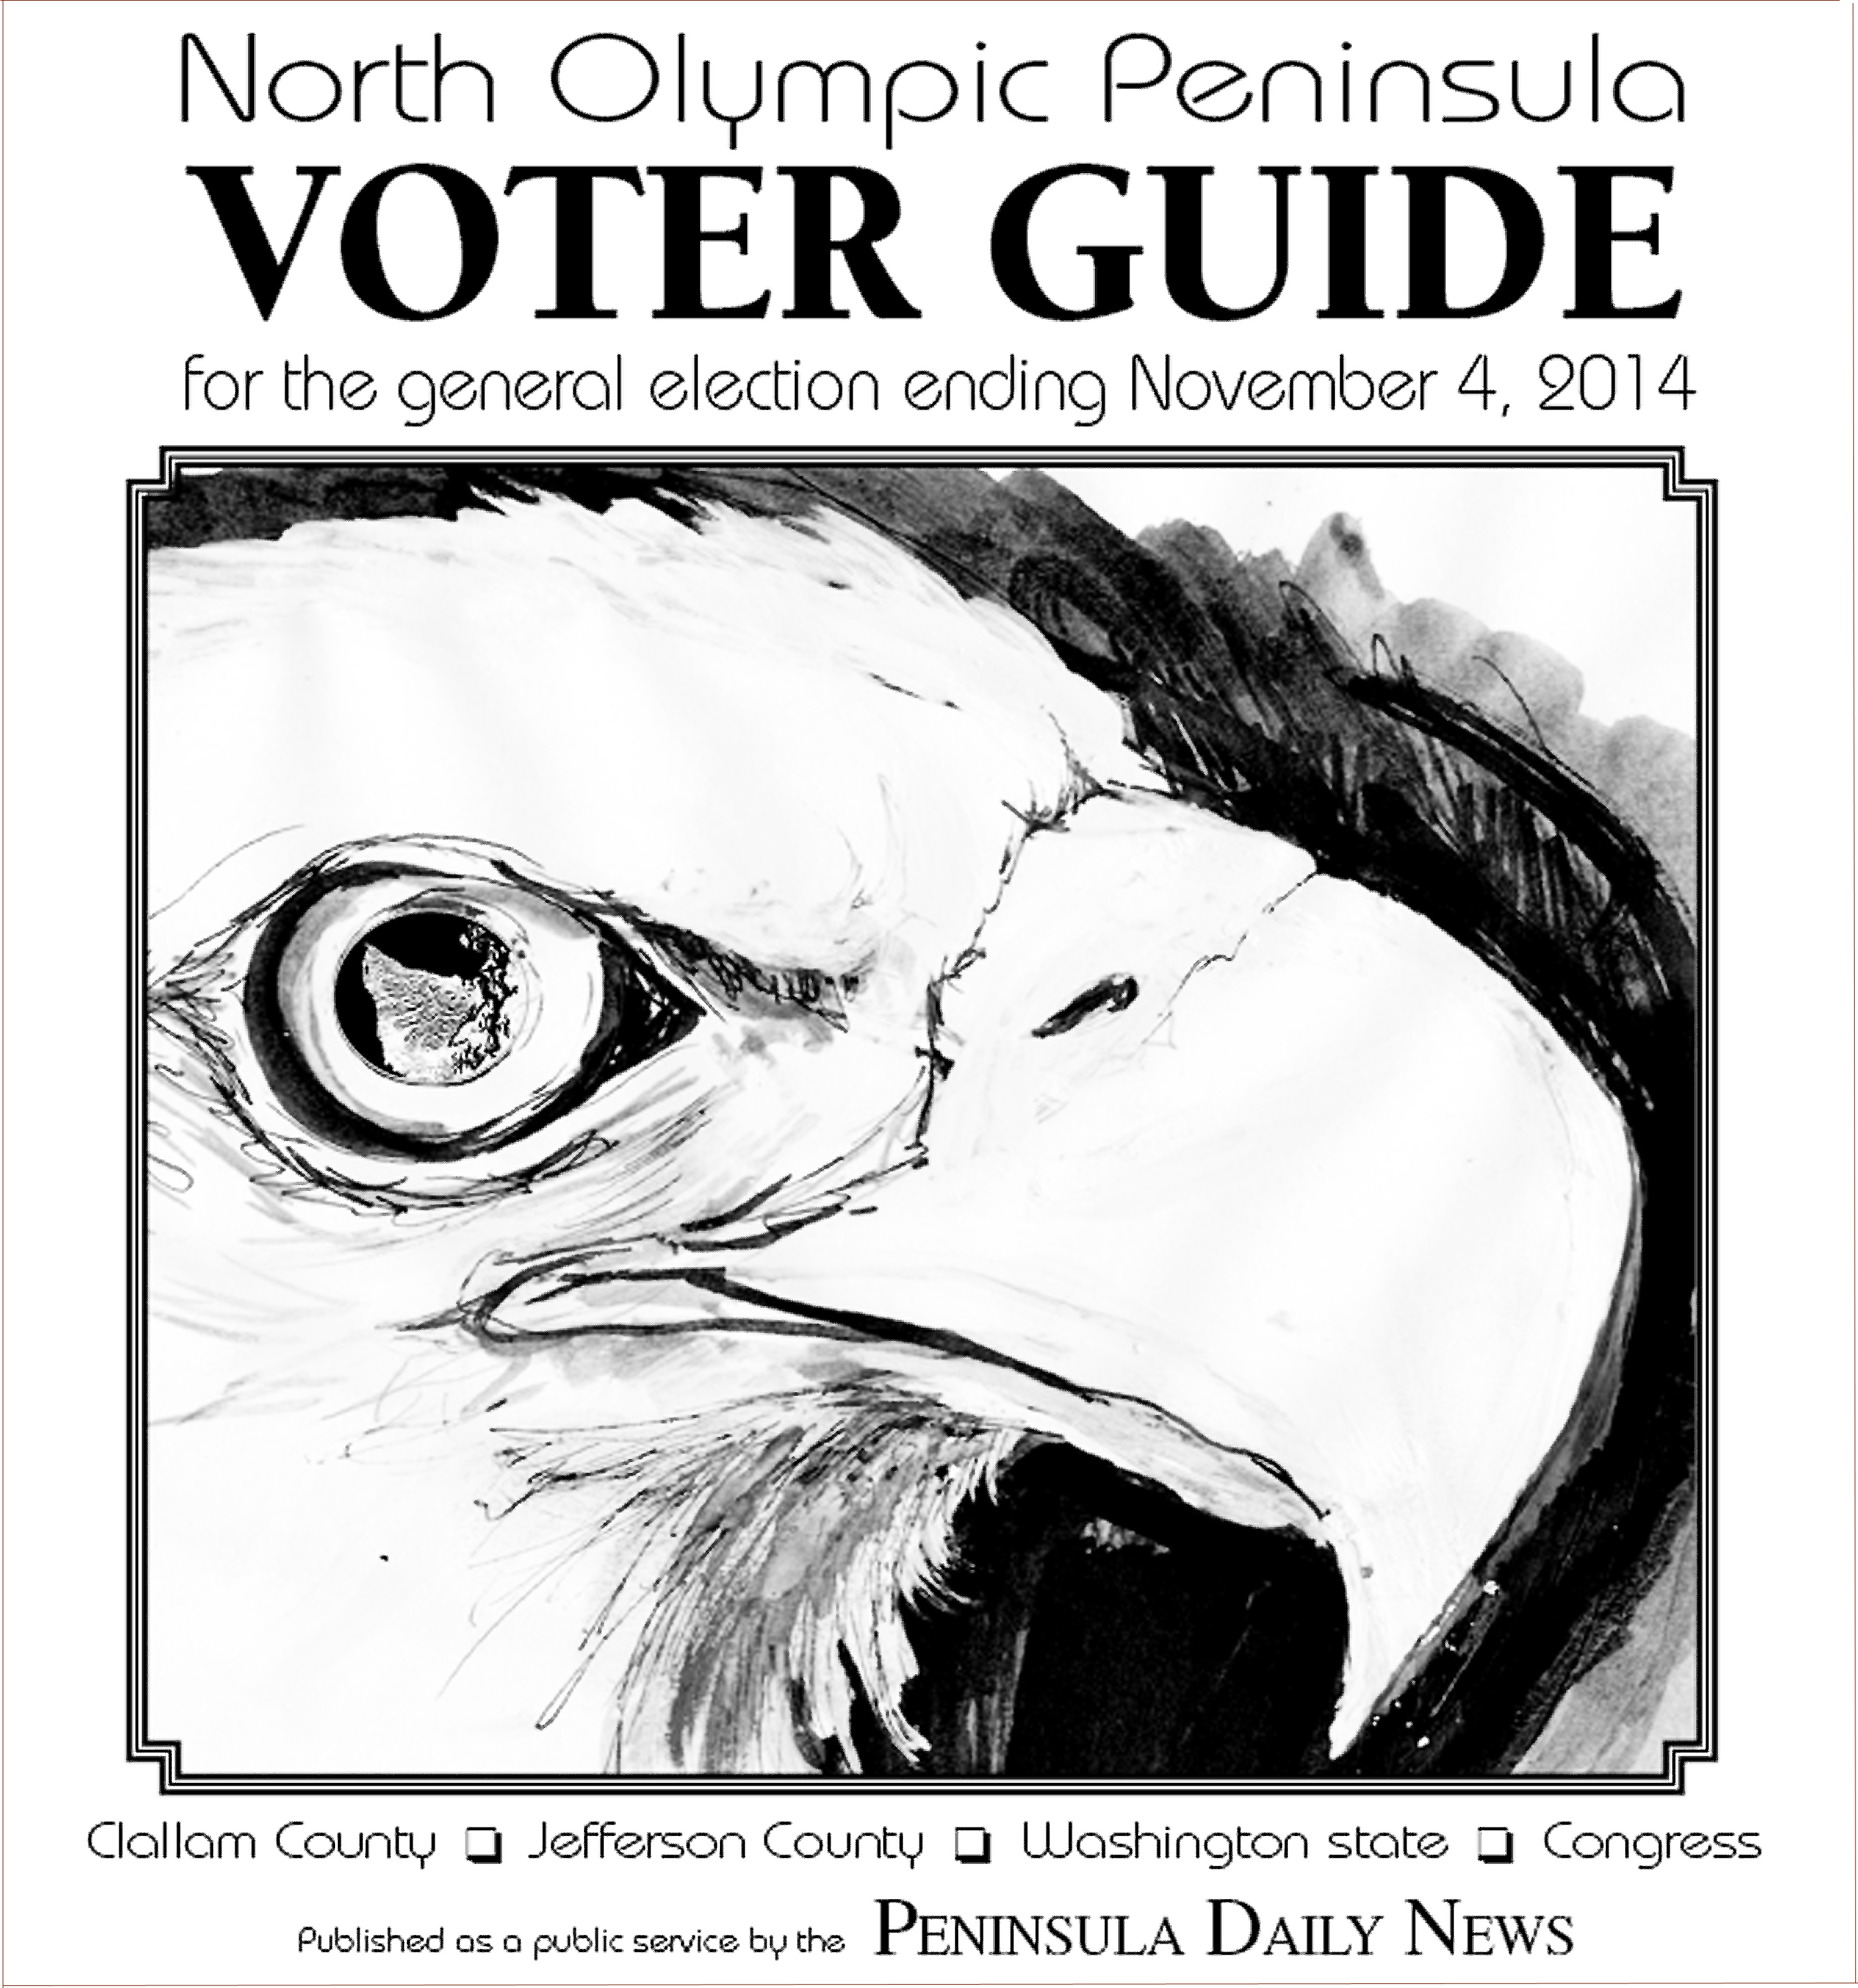 Haven't voted yet? North Olympic Peninsula Voter Guide offers info on state issues, races in Jefferson, Clallam counties